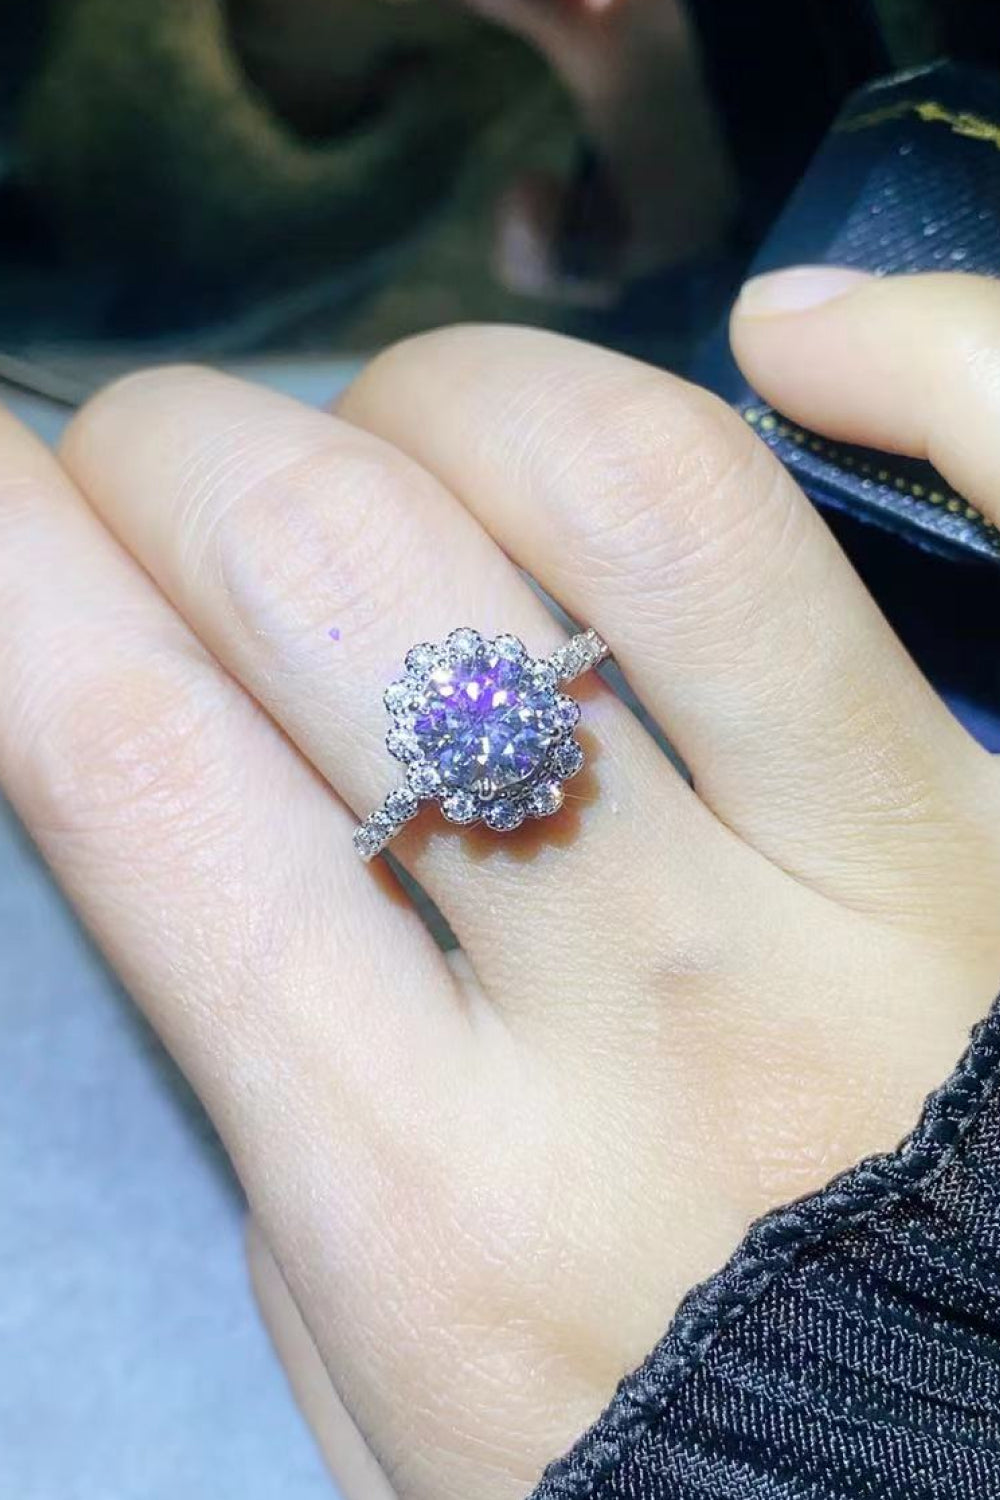 1.5 Carat Moissanite Floral-Shaped Cluster Ring - A captivating and intricate ring design with a sparkling 1.5-carat Moissanite centerpiece arranged in a beautiful floral cluster pattern.